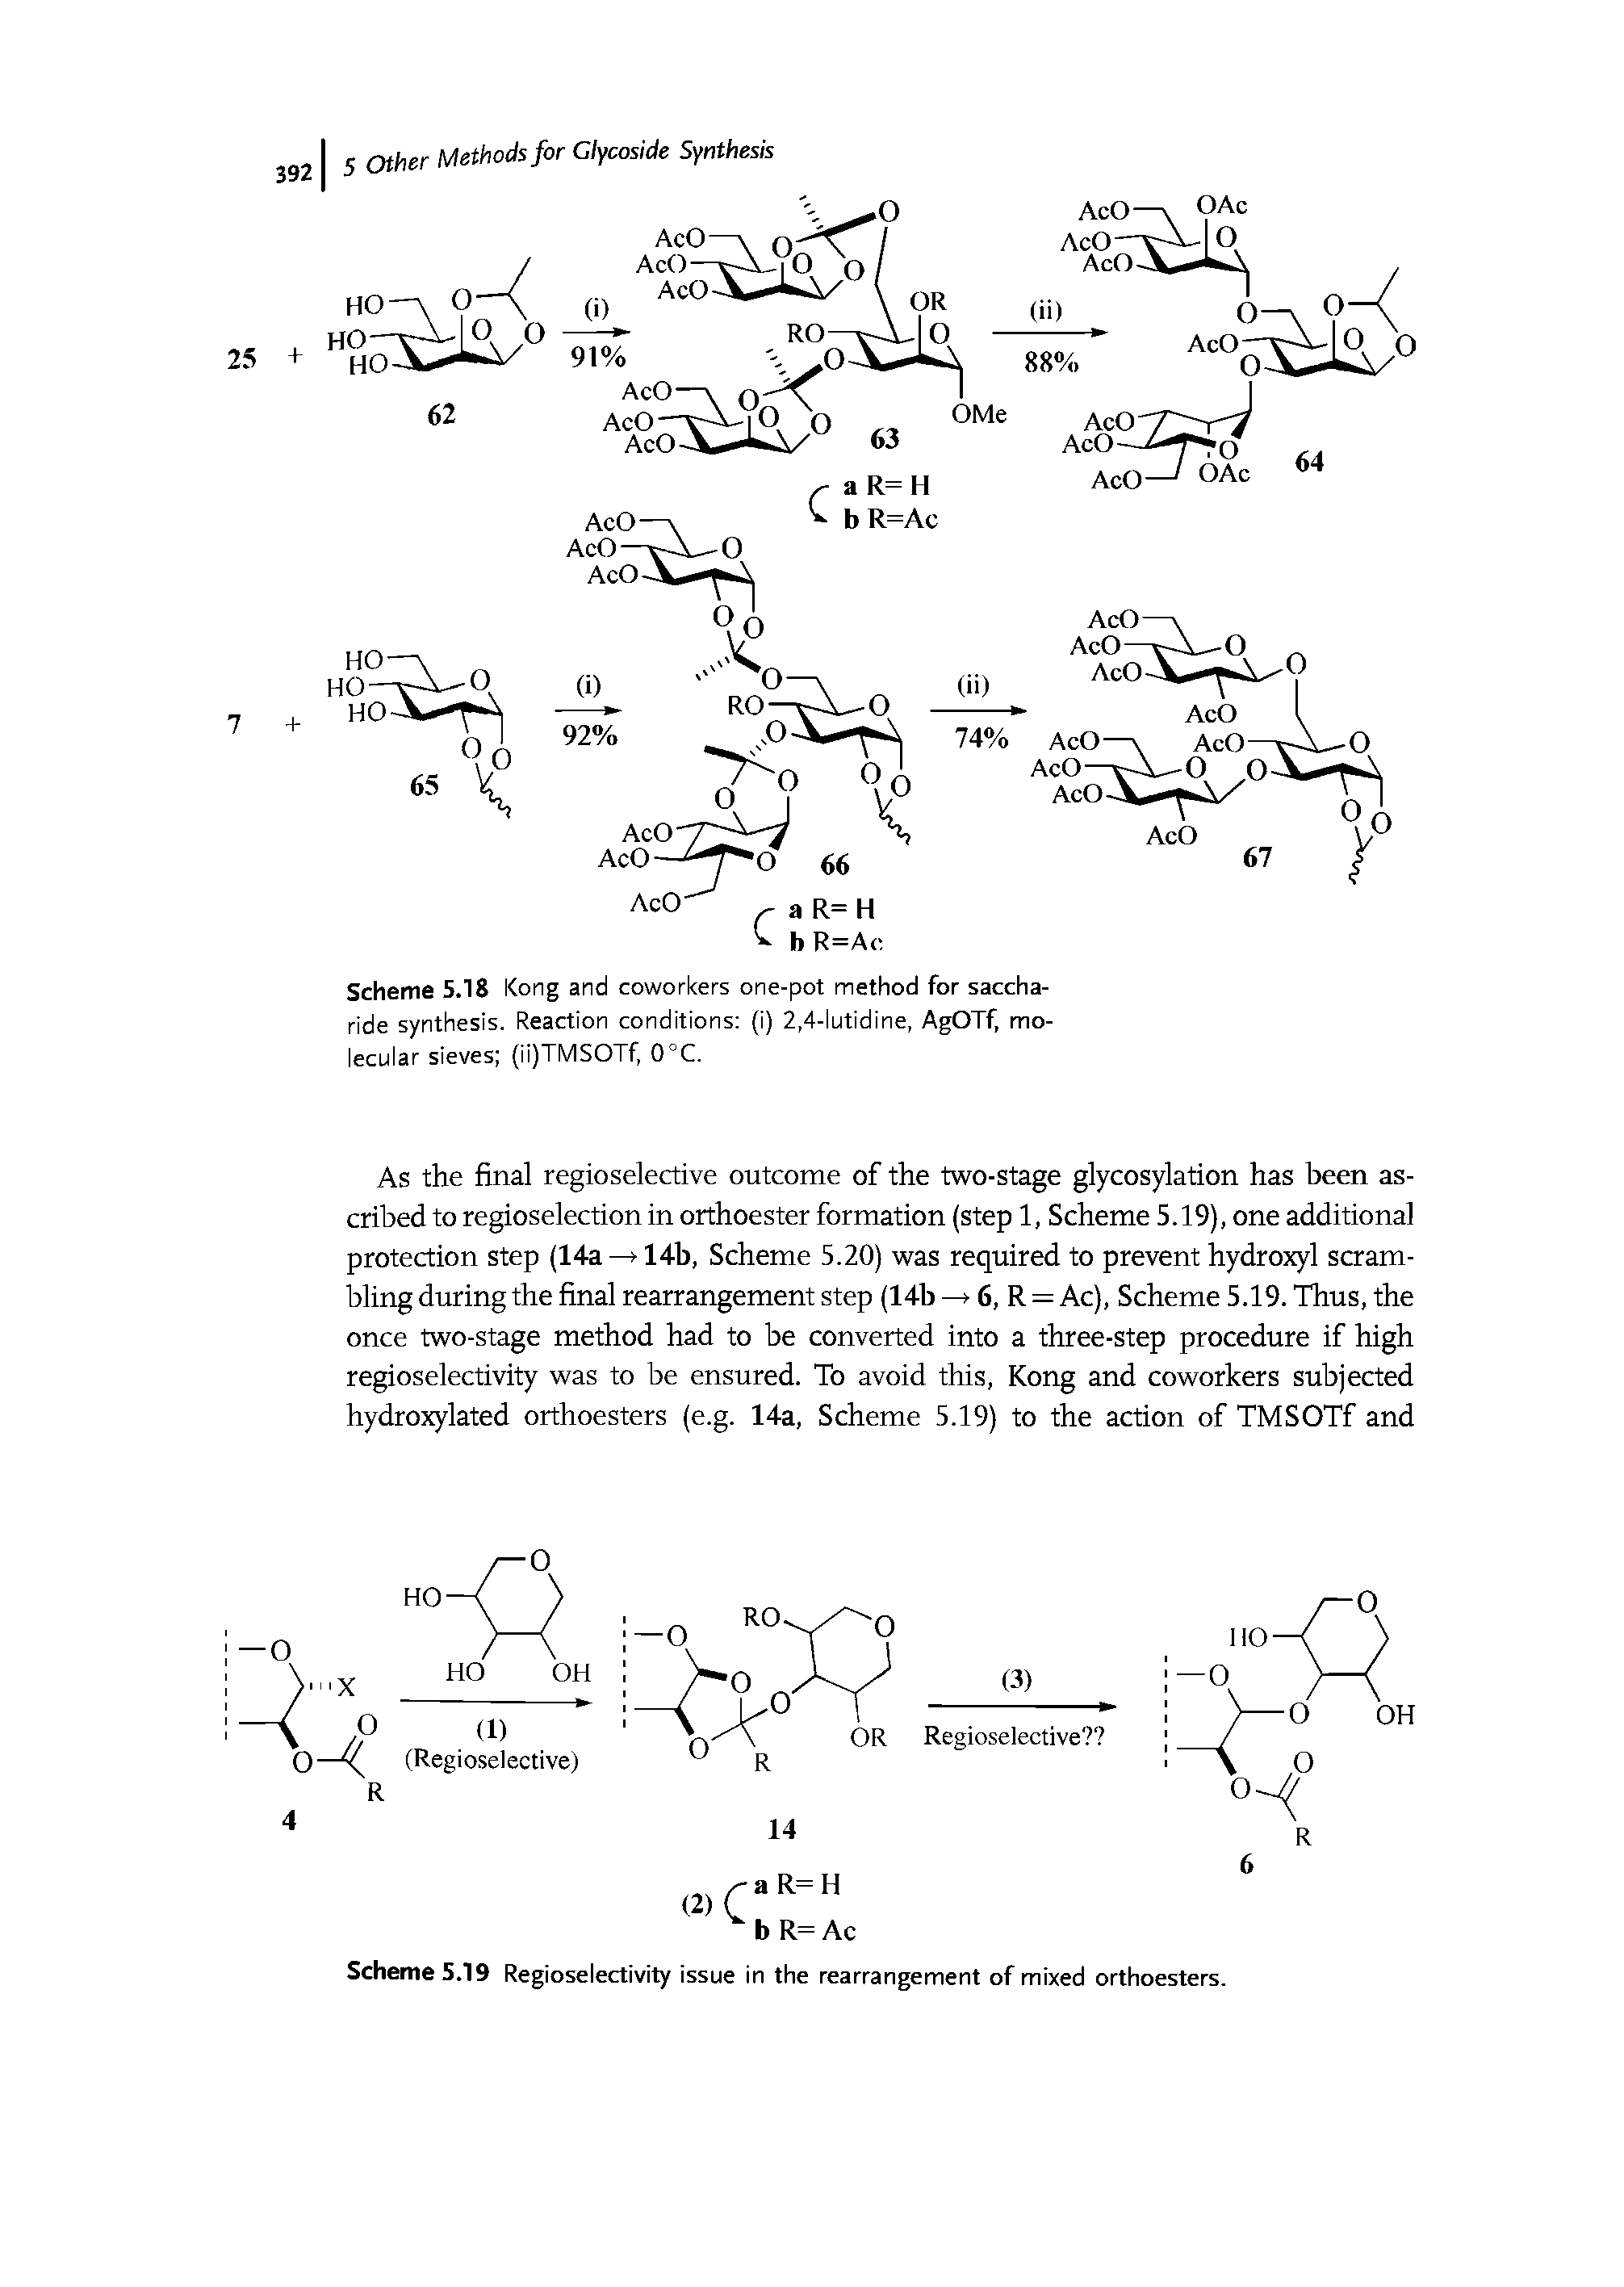 Scheme 5.18 Kong and coworkers one-pot method for saccharide synthesis. Reaction conditions (i) 2,4-lutidine, AgOTf, molecular sieves (ii)TMSOTf, 0°C.